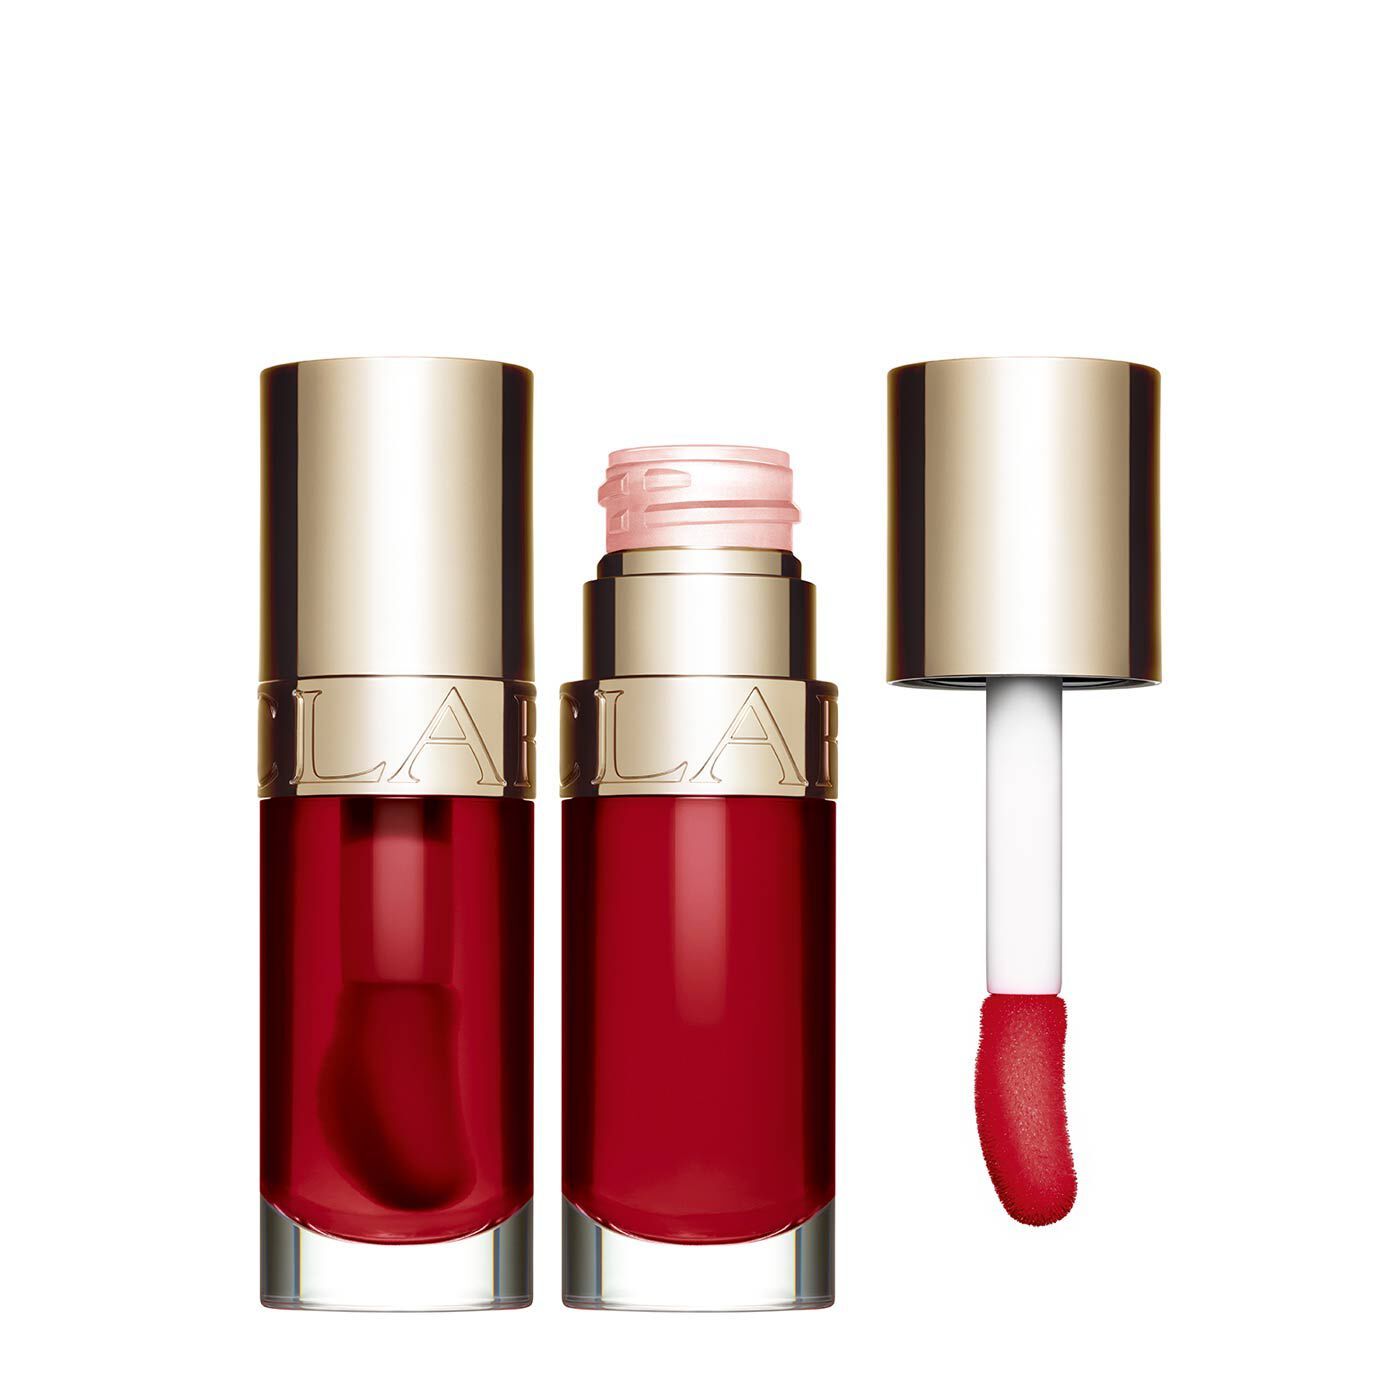 Clarins Lip Comfort Oil Hydrating and Plumping Lip Oil 0.2 Oz. - 03 cherry | Clarins USA